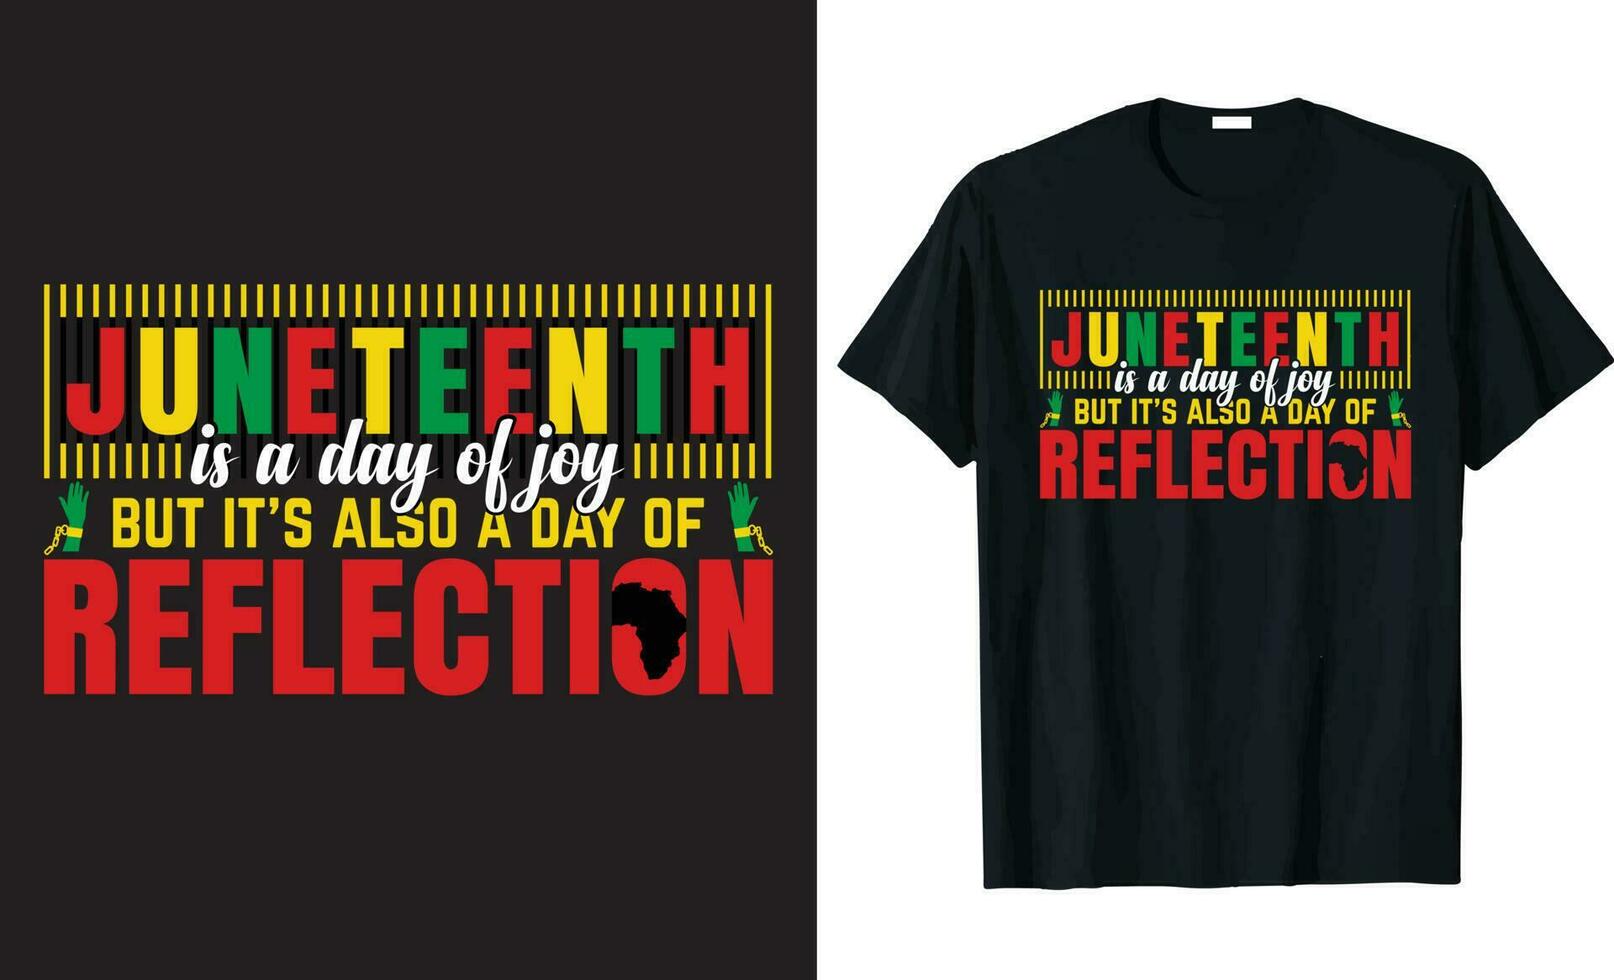 Juneteenth is a day of joy but it's also a day of reflection - Juneteenth typography t-shirt design. vector